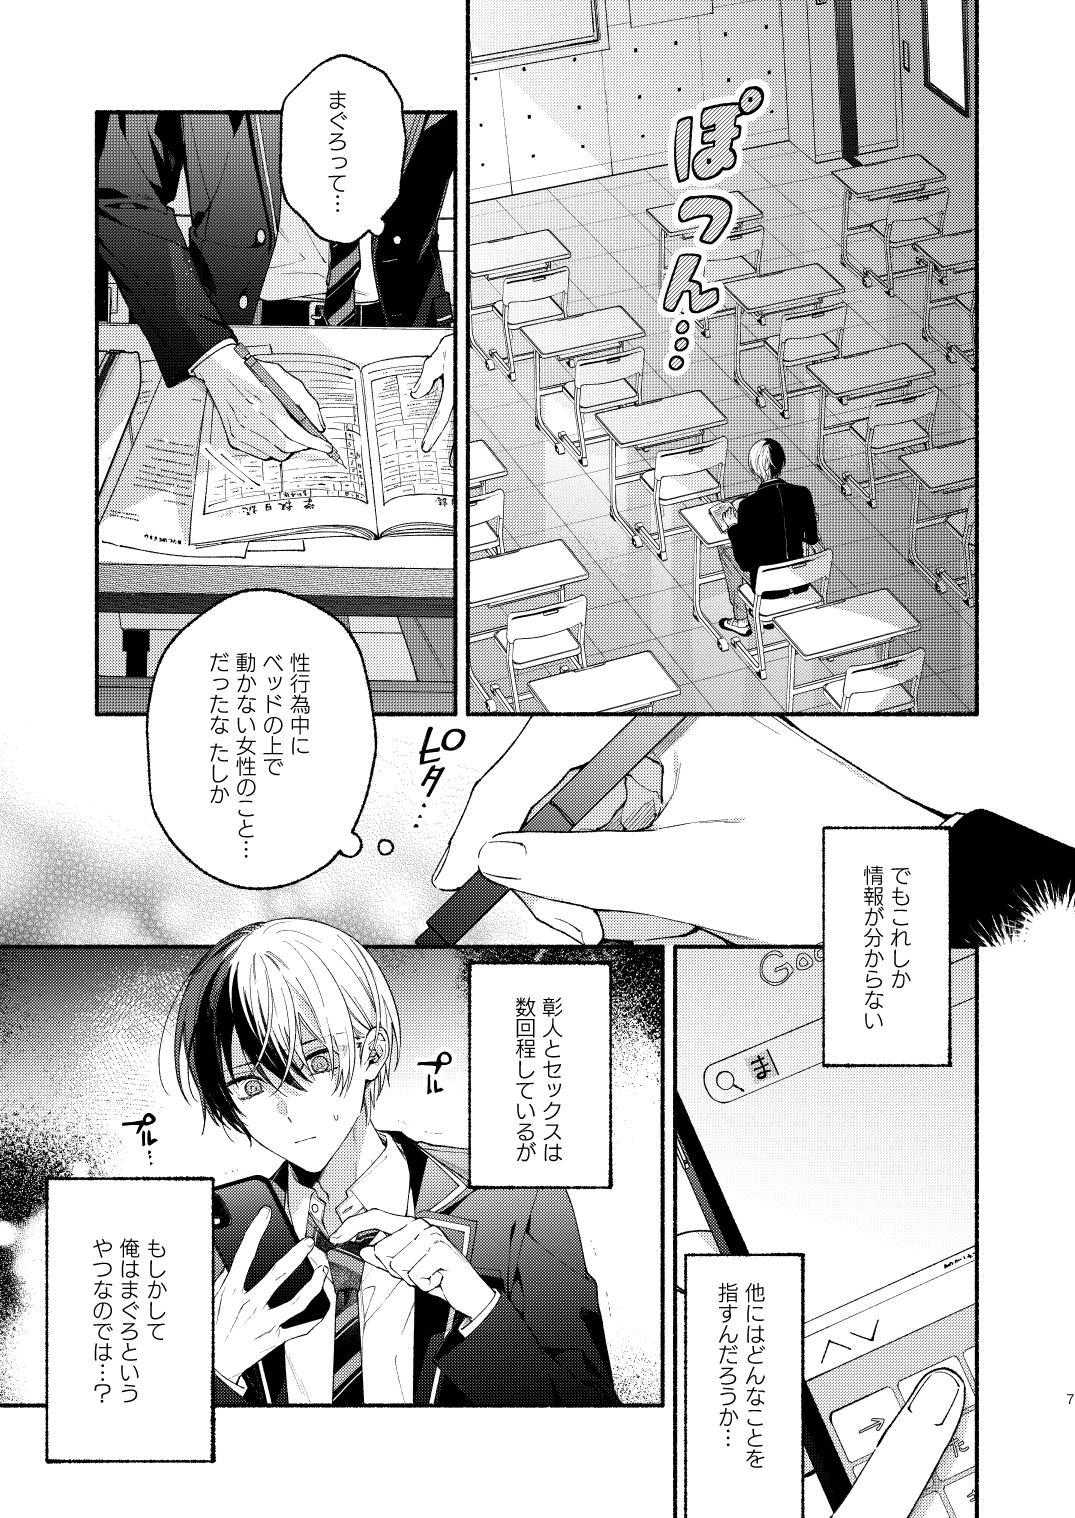 Suckingdick Chotto Renshuu Sasete Kure | Let me practice a little - Project sekai For - Page 6